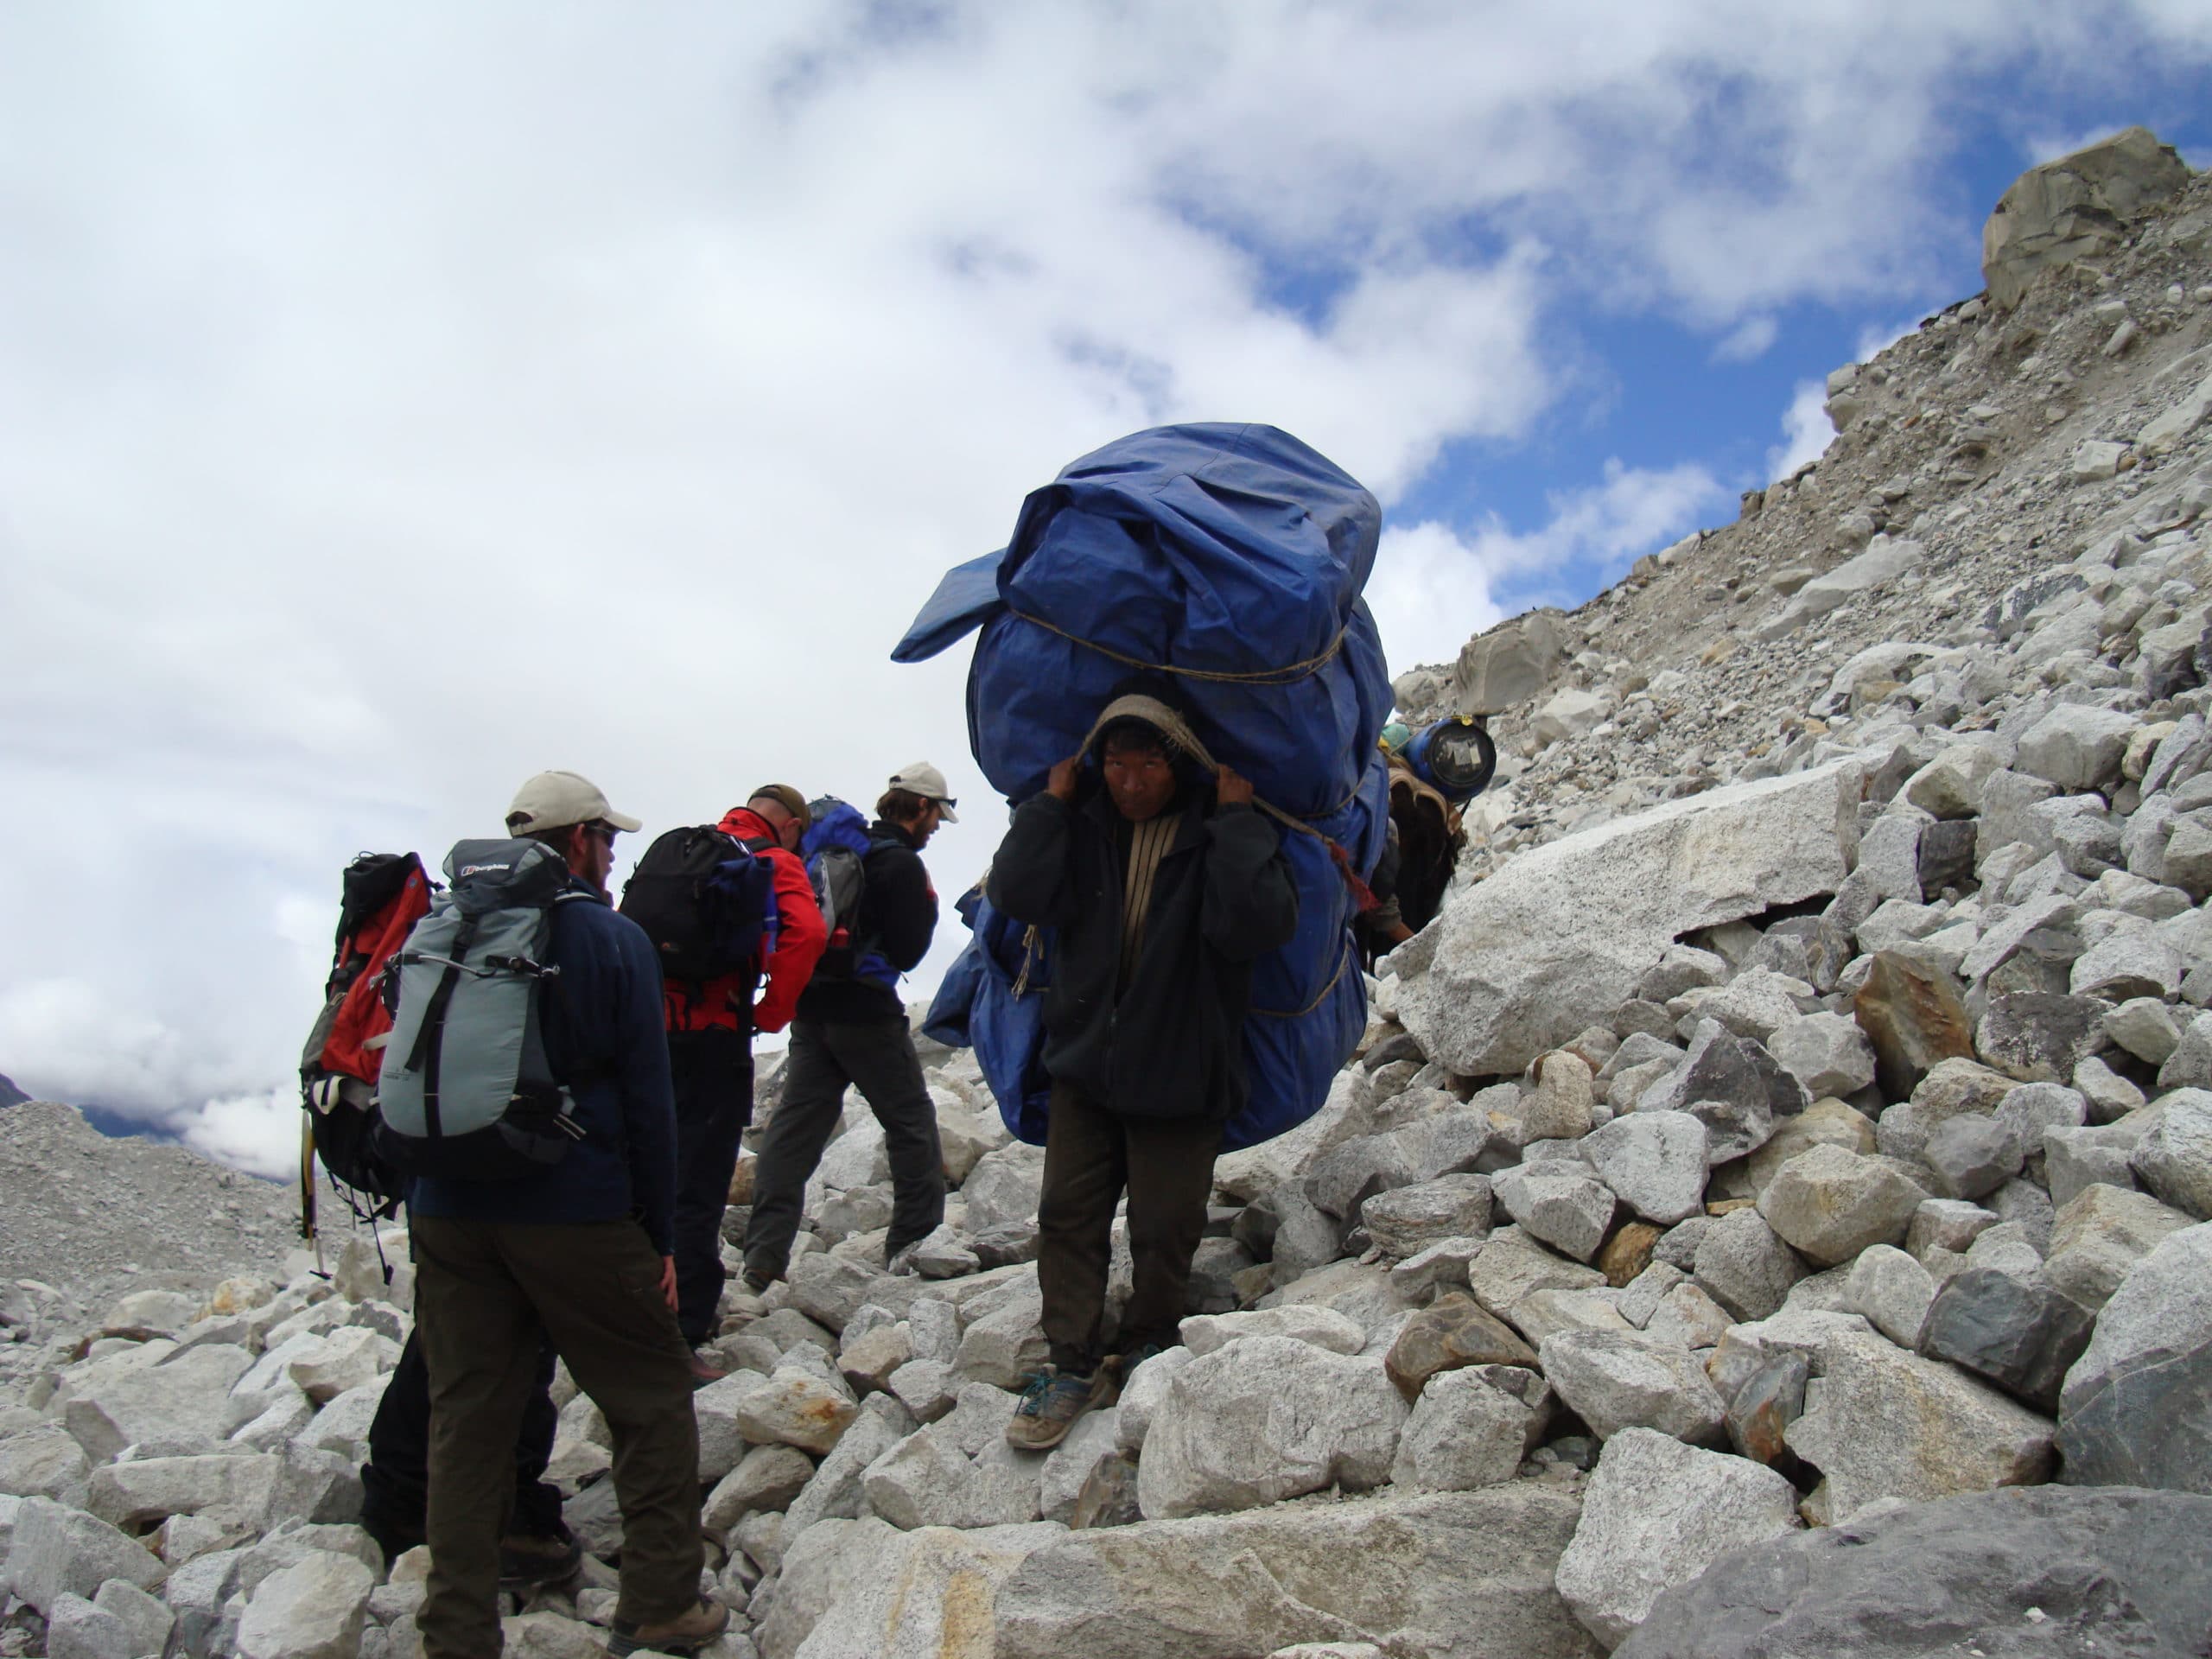 Why do porters carry so much weight in the Everest region